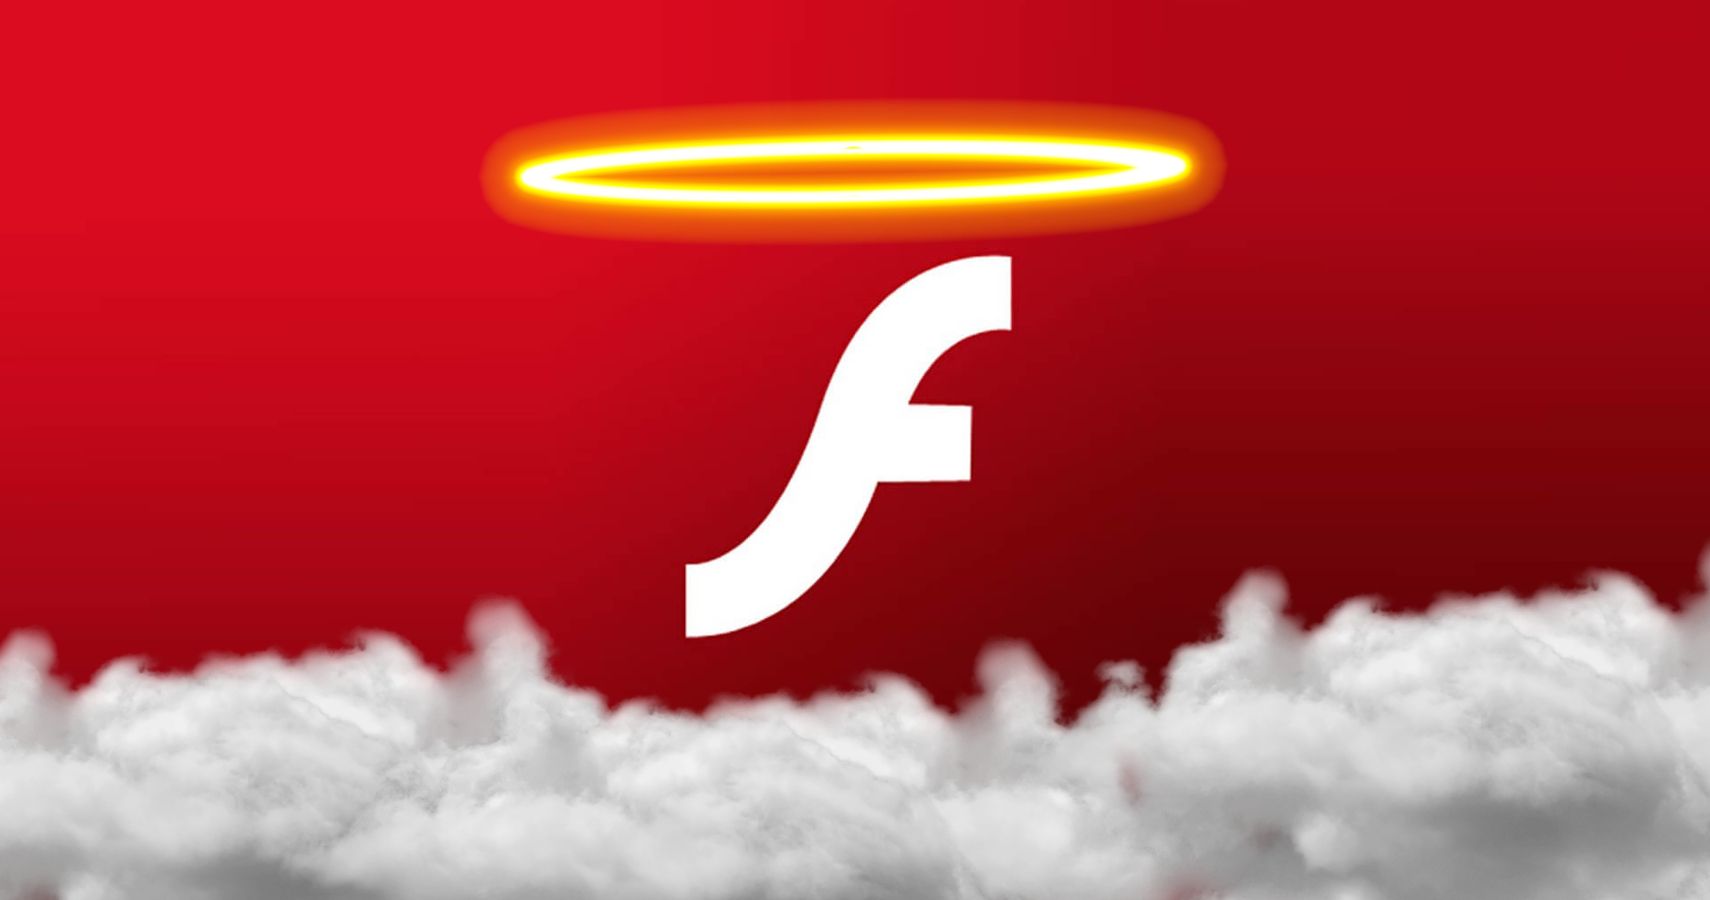 Flash Games Player